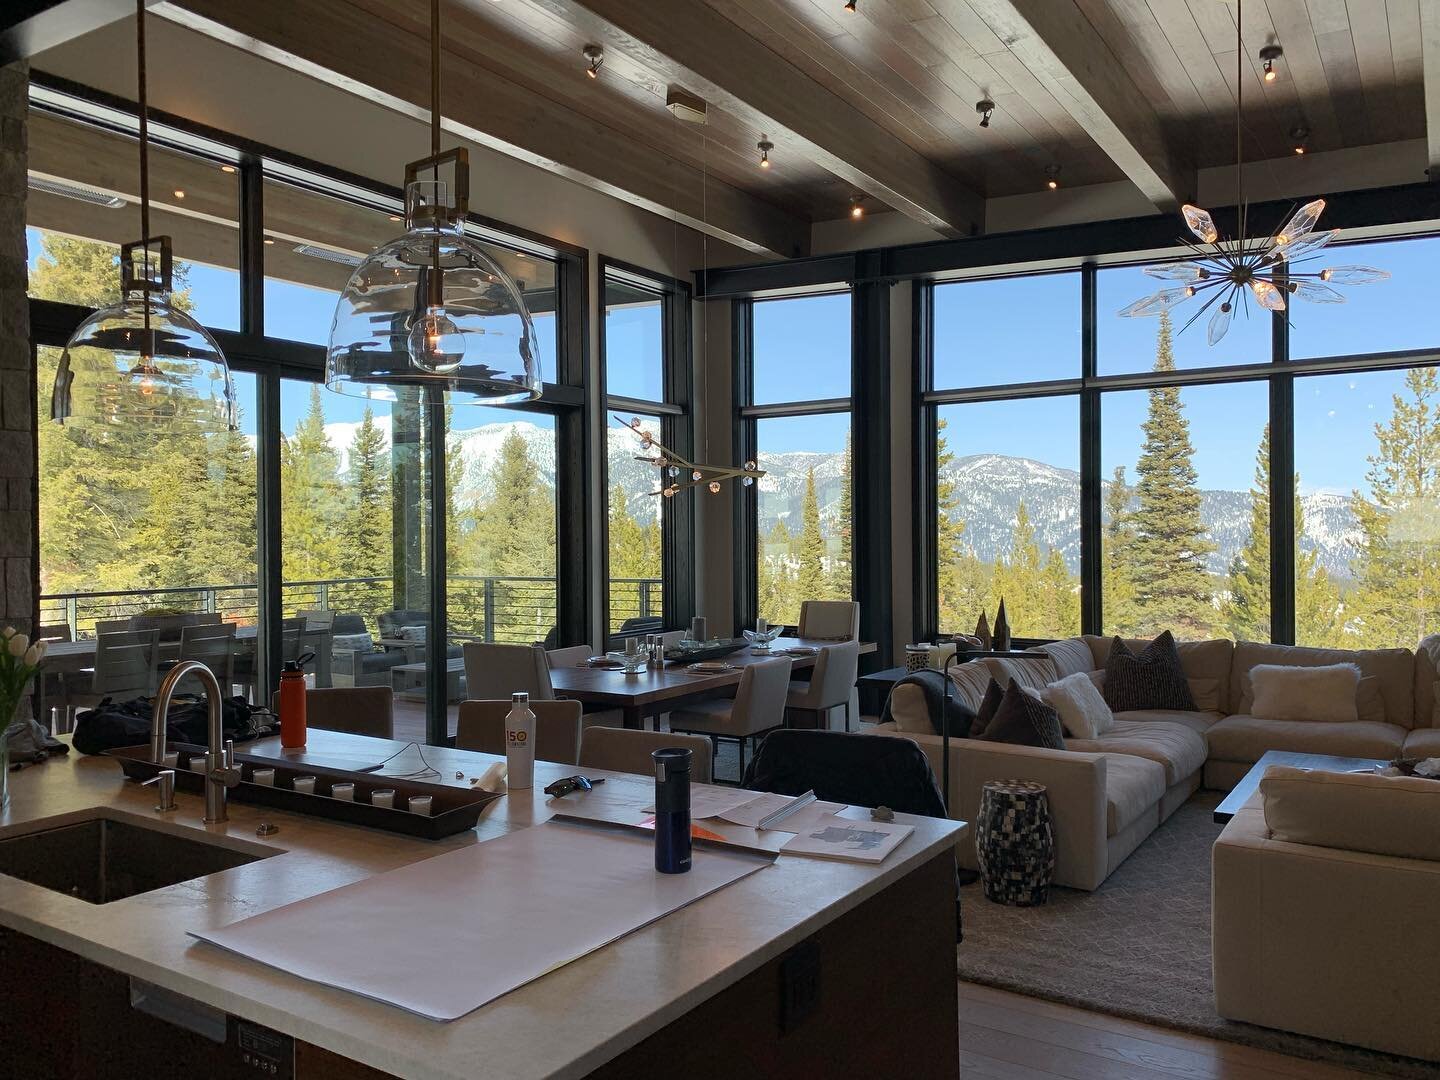 We are doing a final photo shoot and enjoying a wonderful day in @bigskyresort in @spanishpeaksmountainclub working with @karlneumannphotography for some great shots. Big thanks to our clients for hiring Brechbuhler Architects to design for their spe